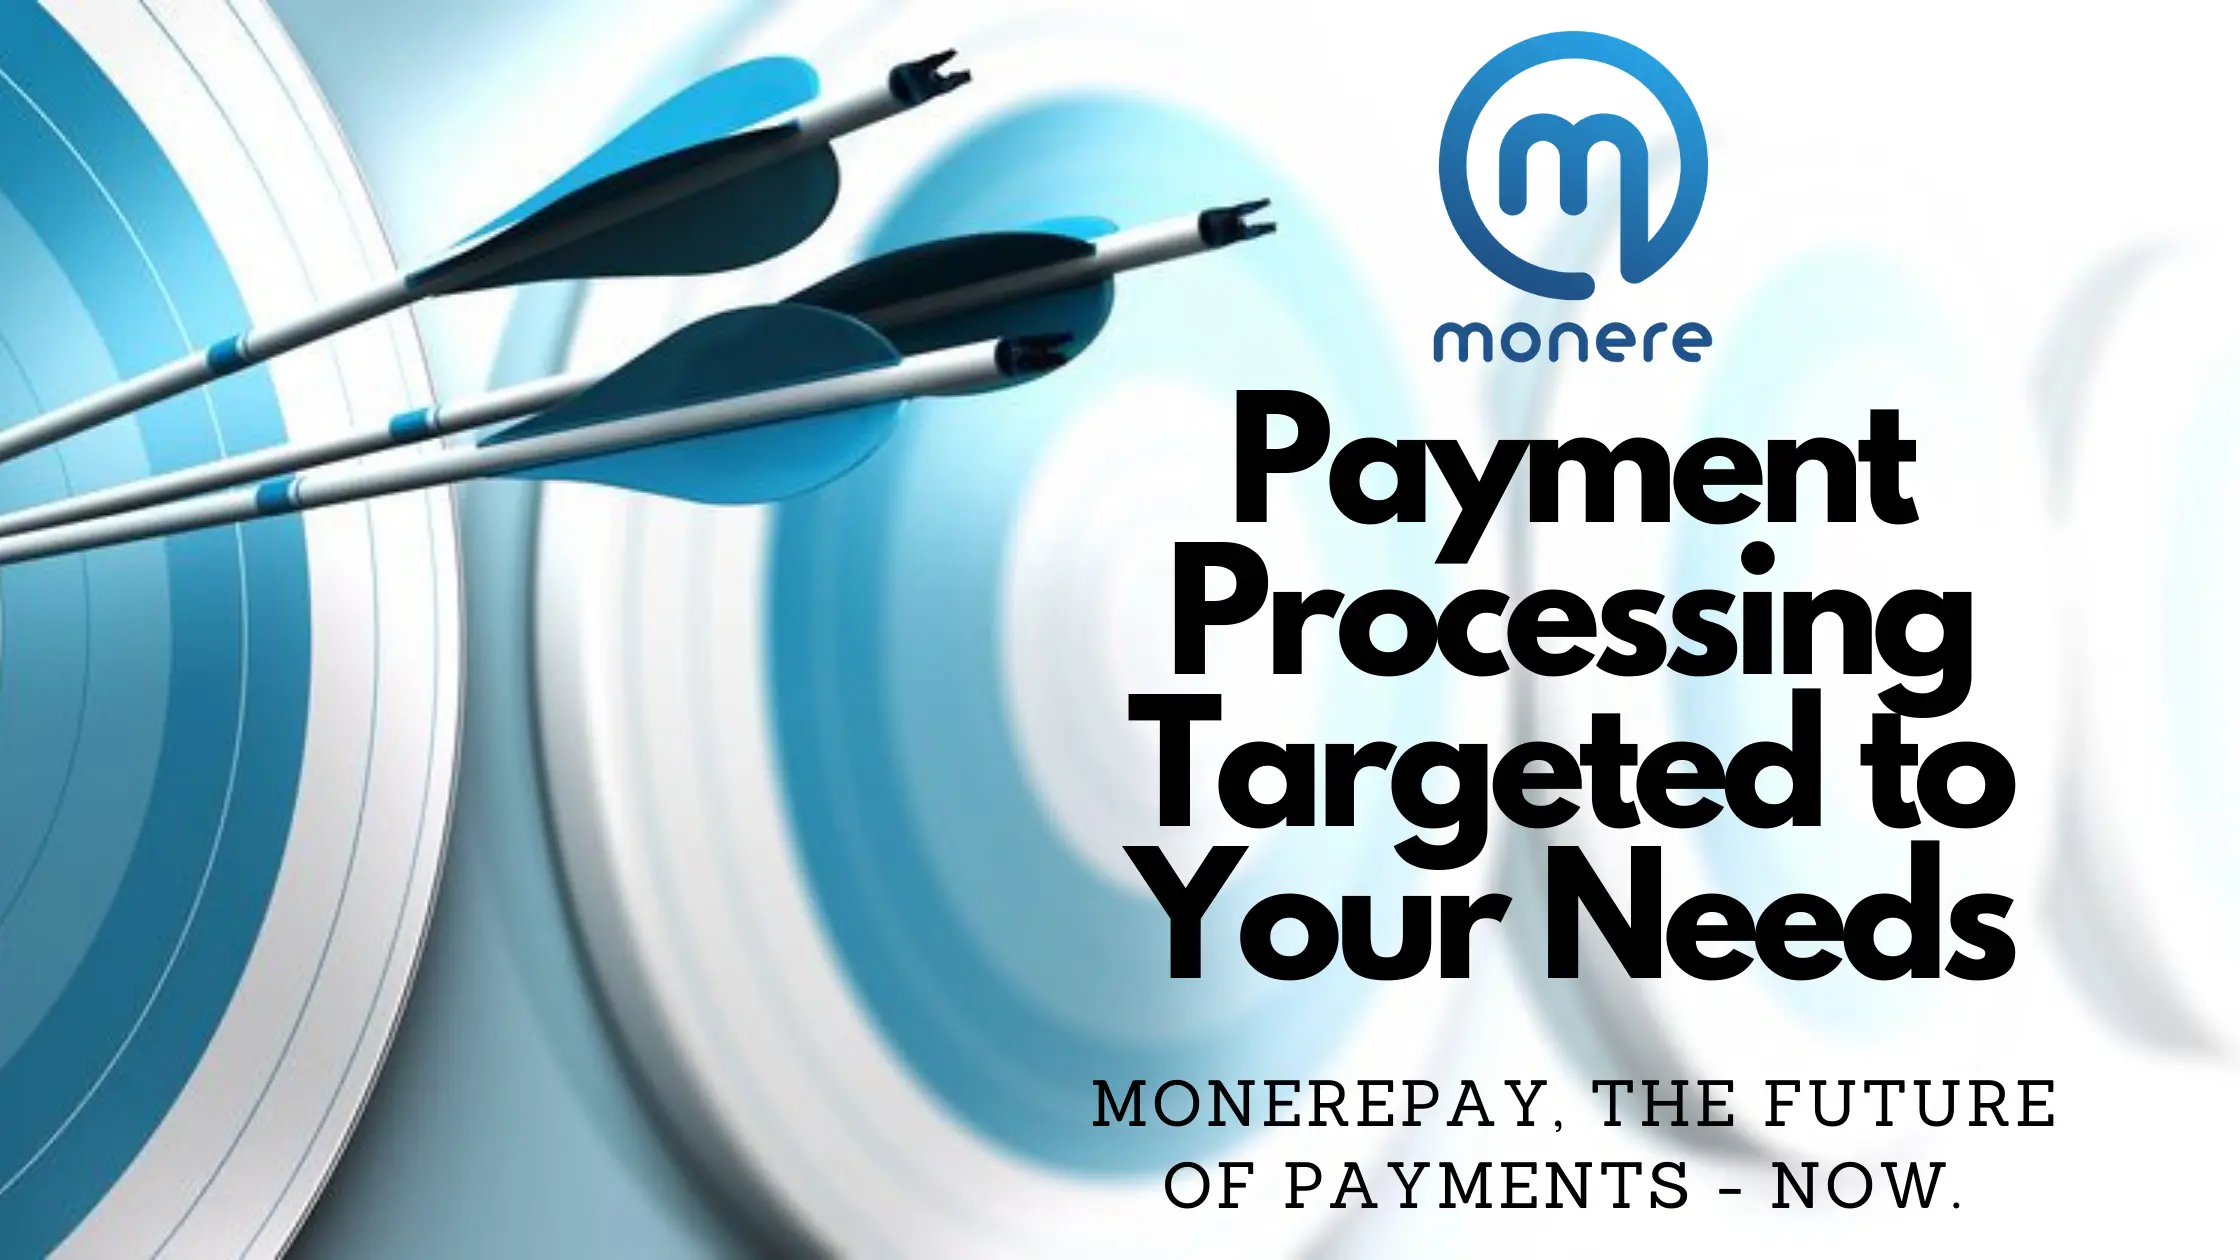 Optimize your merchant account for mobile wallet payments.